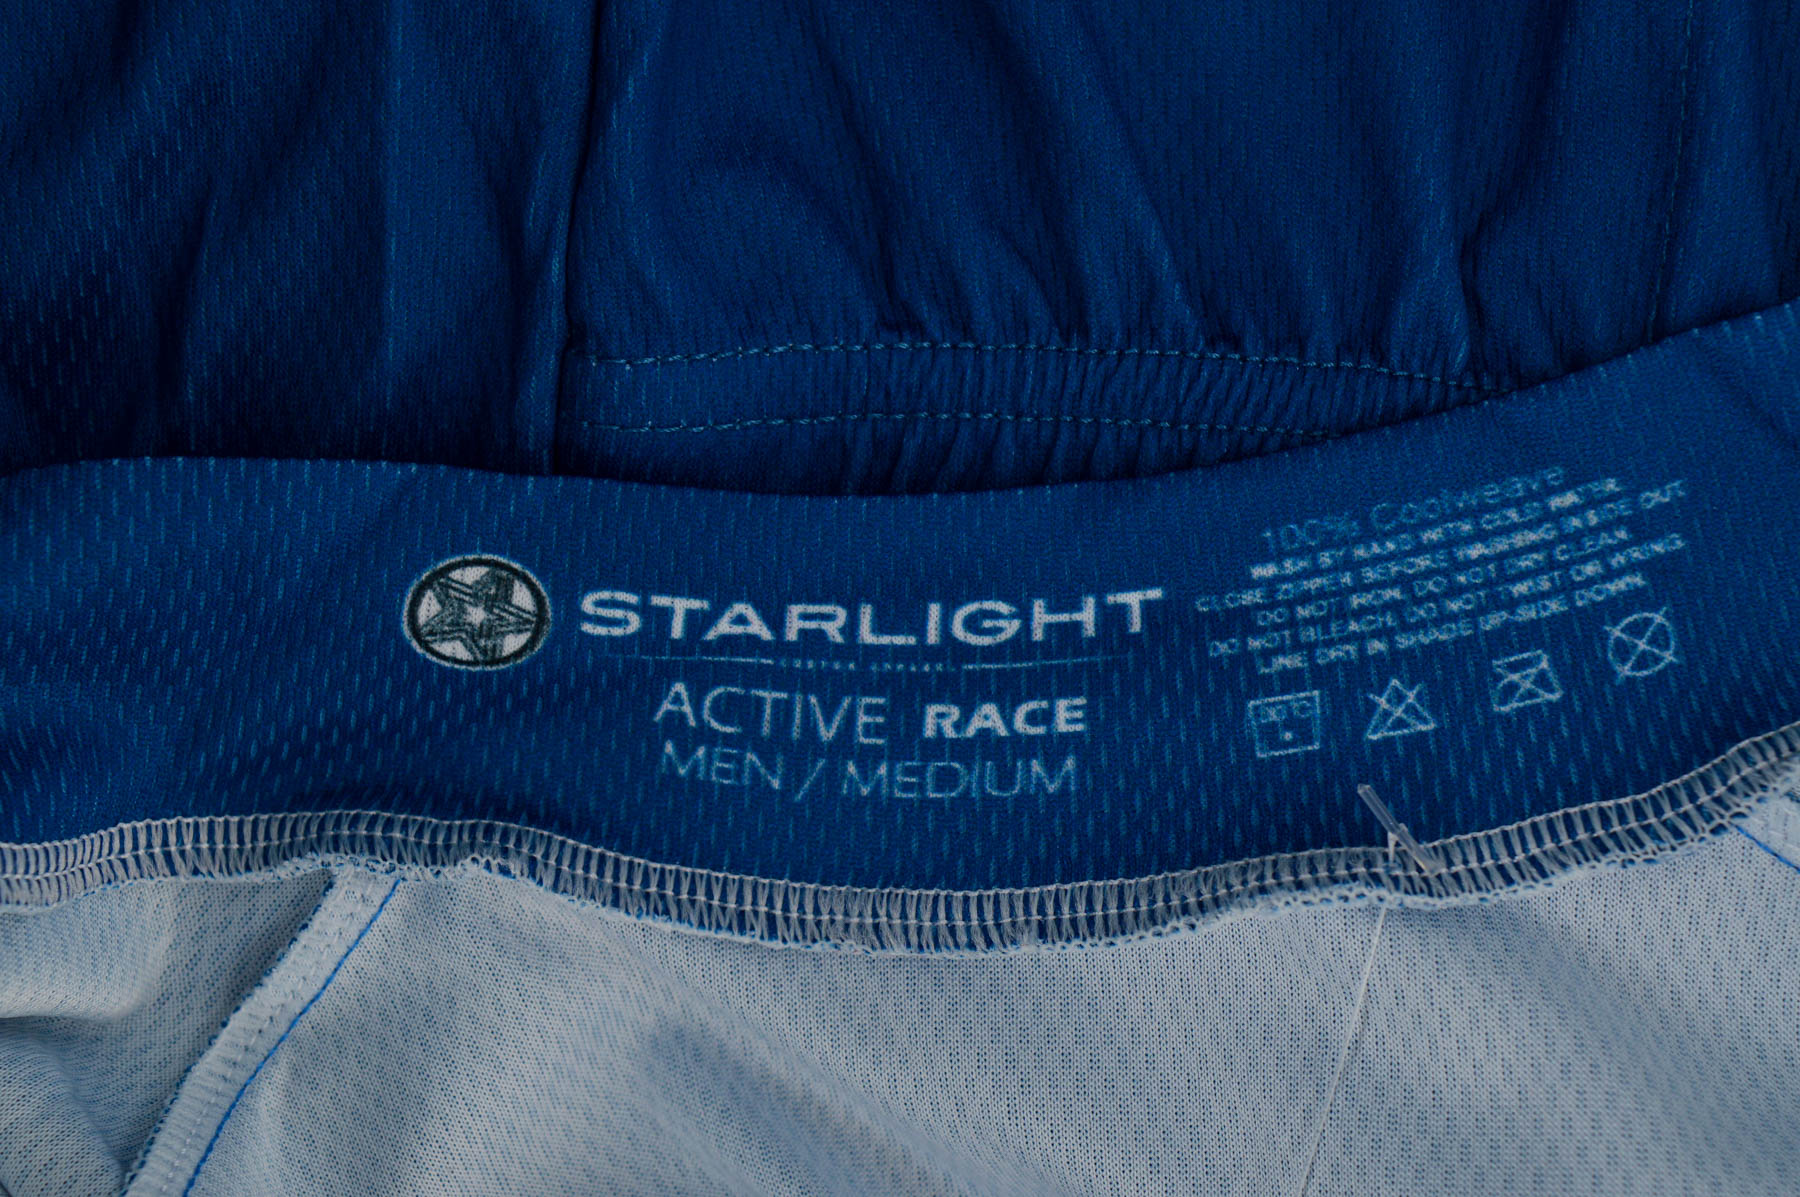 Male sports top for cycling - STARLIGHT - 2